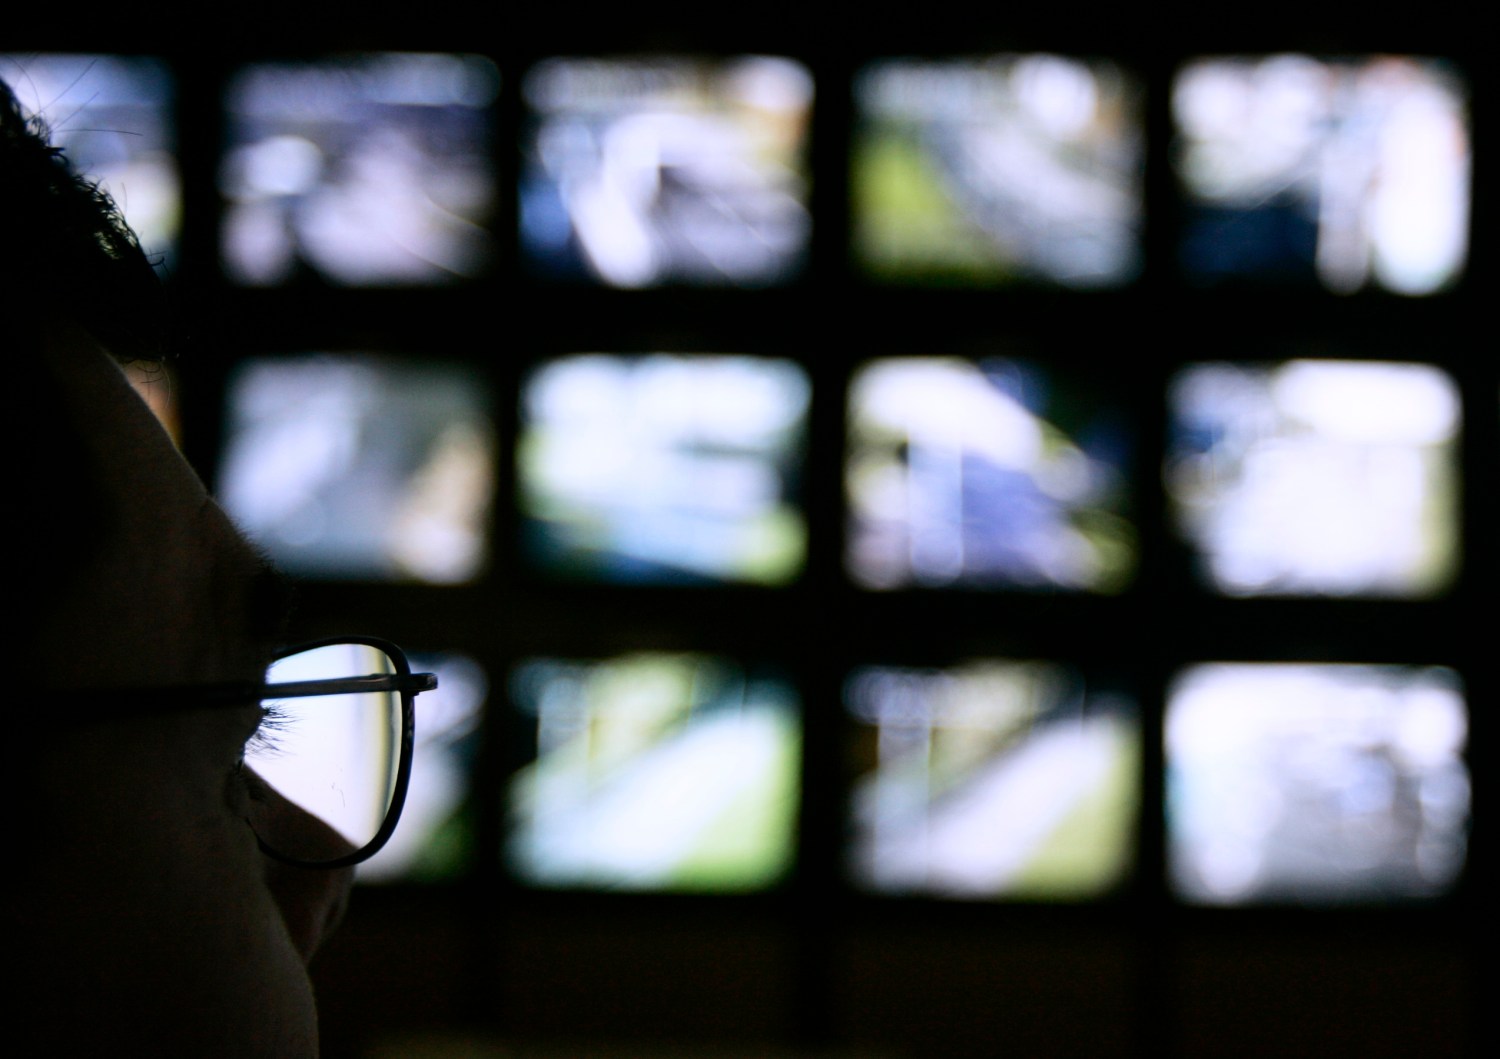 A surveillance monitoring expert watches a bank of screens showing images from CCTV cameras